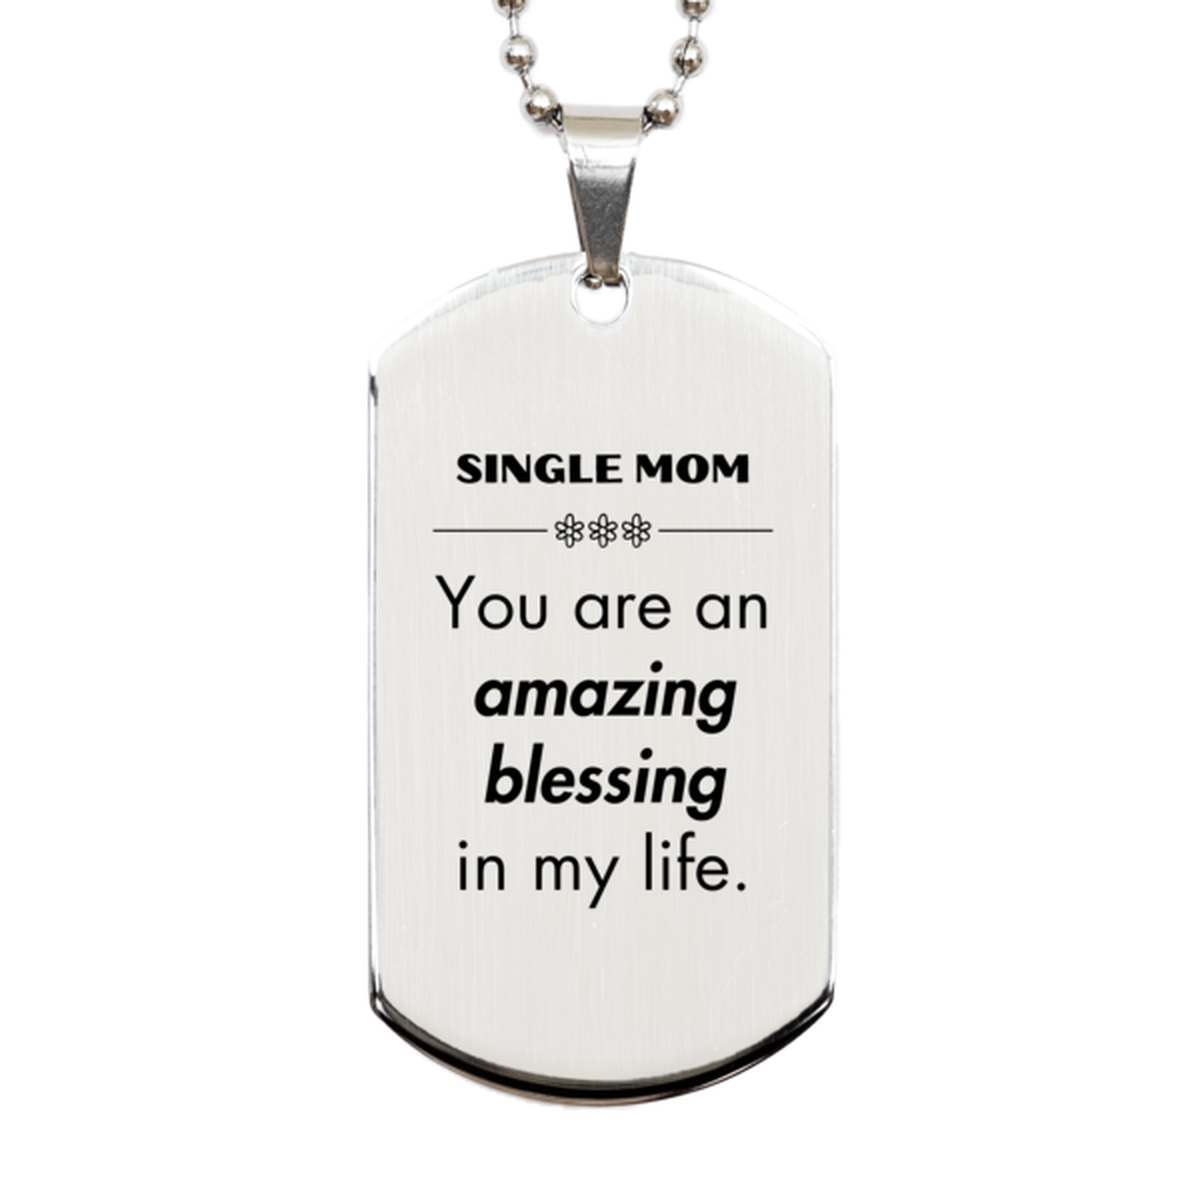 Single Mom Silver Dog Tag, You are an amazing blessing in my life, Thank You Gifts For Single Mom, Inspirational Birthday Christmas Unique Gifts For Single Mom